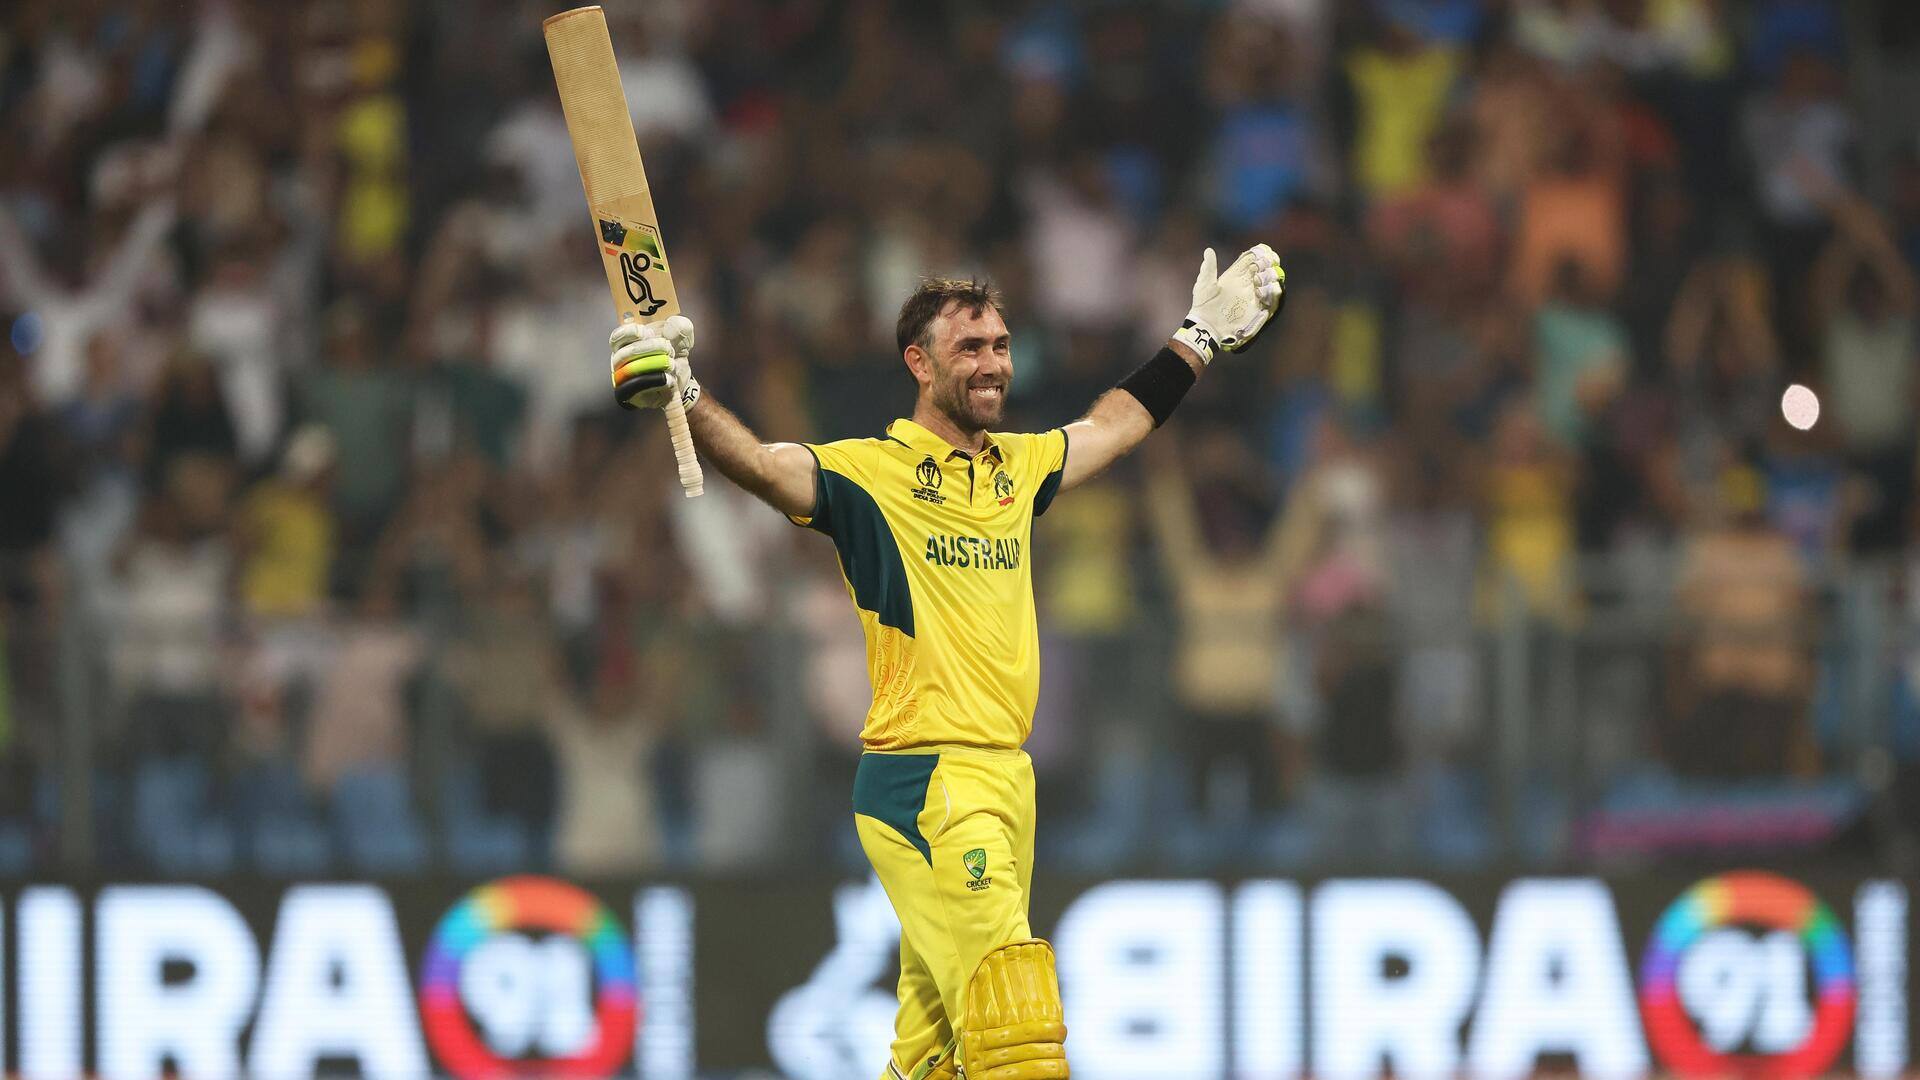 Glenn Maxwell has the joint-most T20I tons: Presenting his centuries